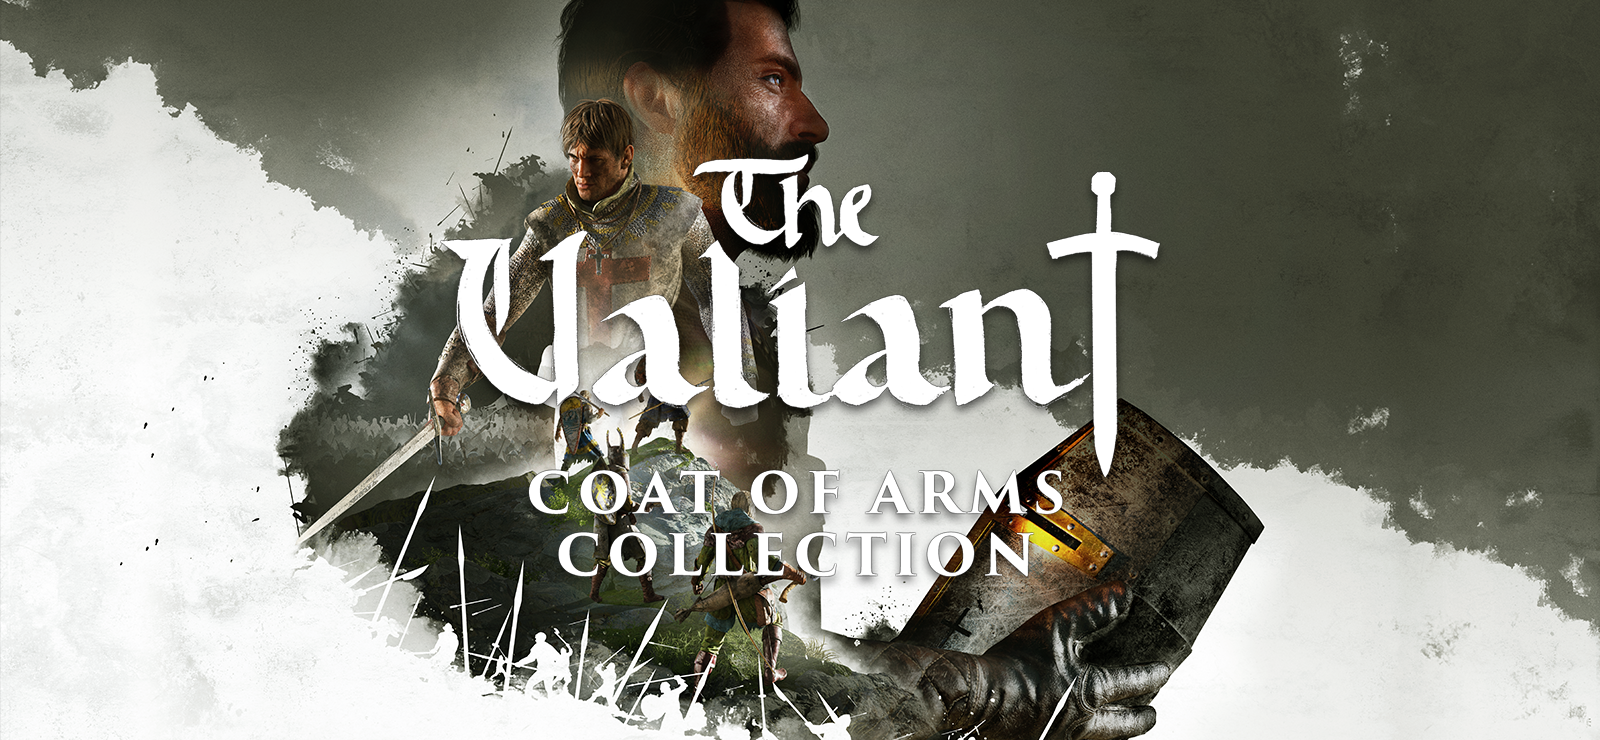 The Valiant - Coat Of Arms Collection